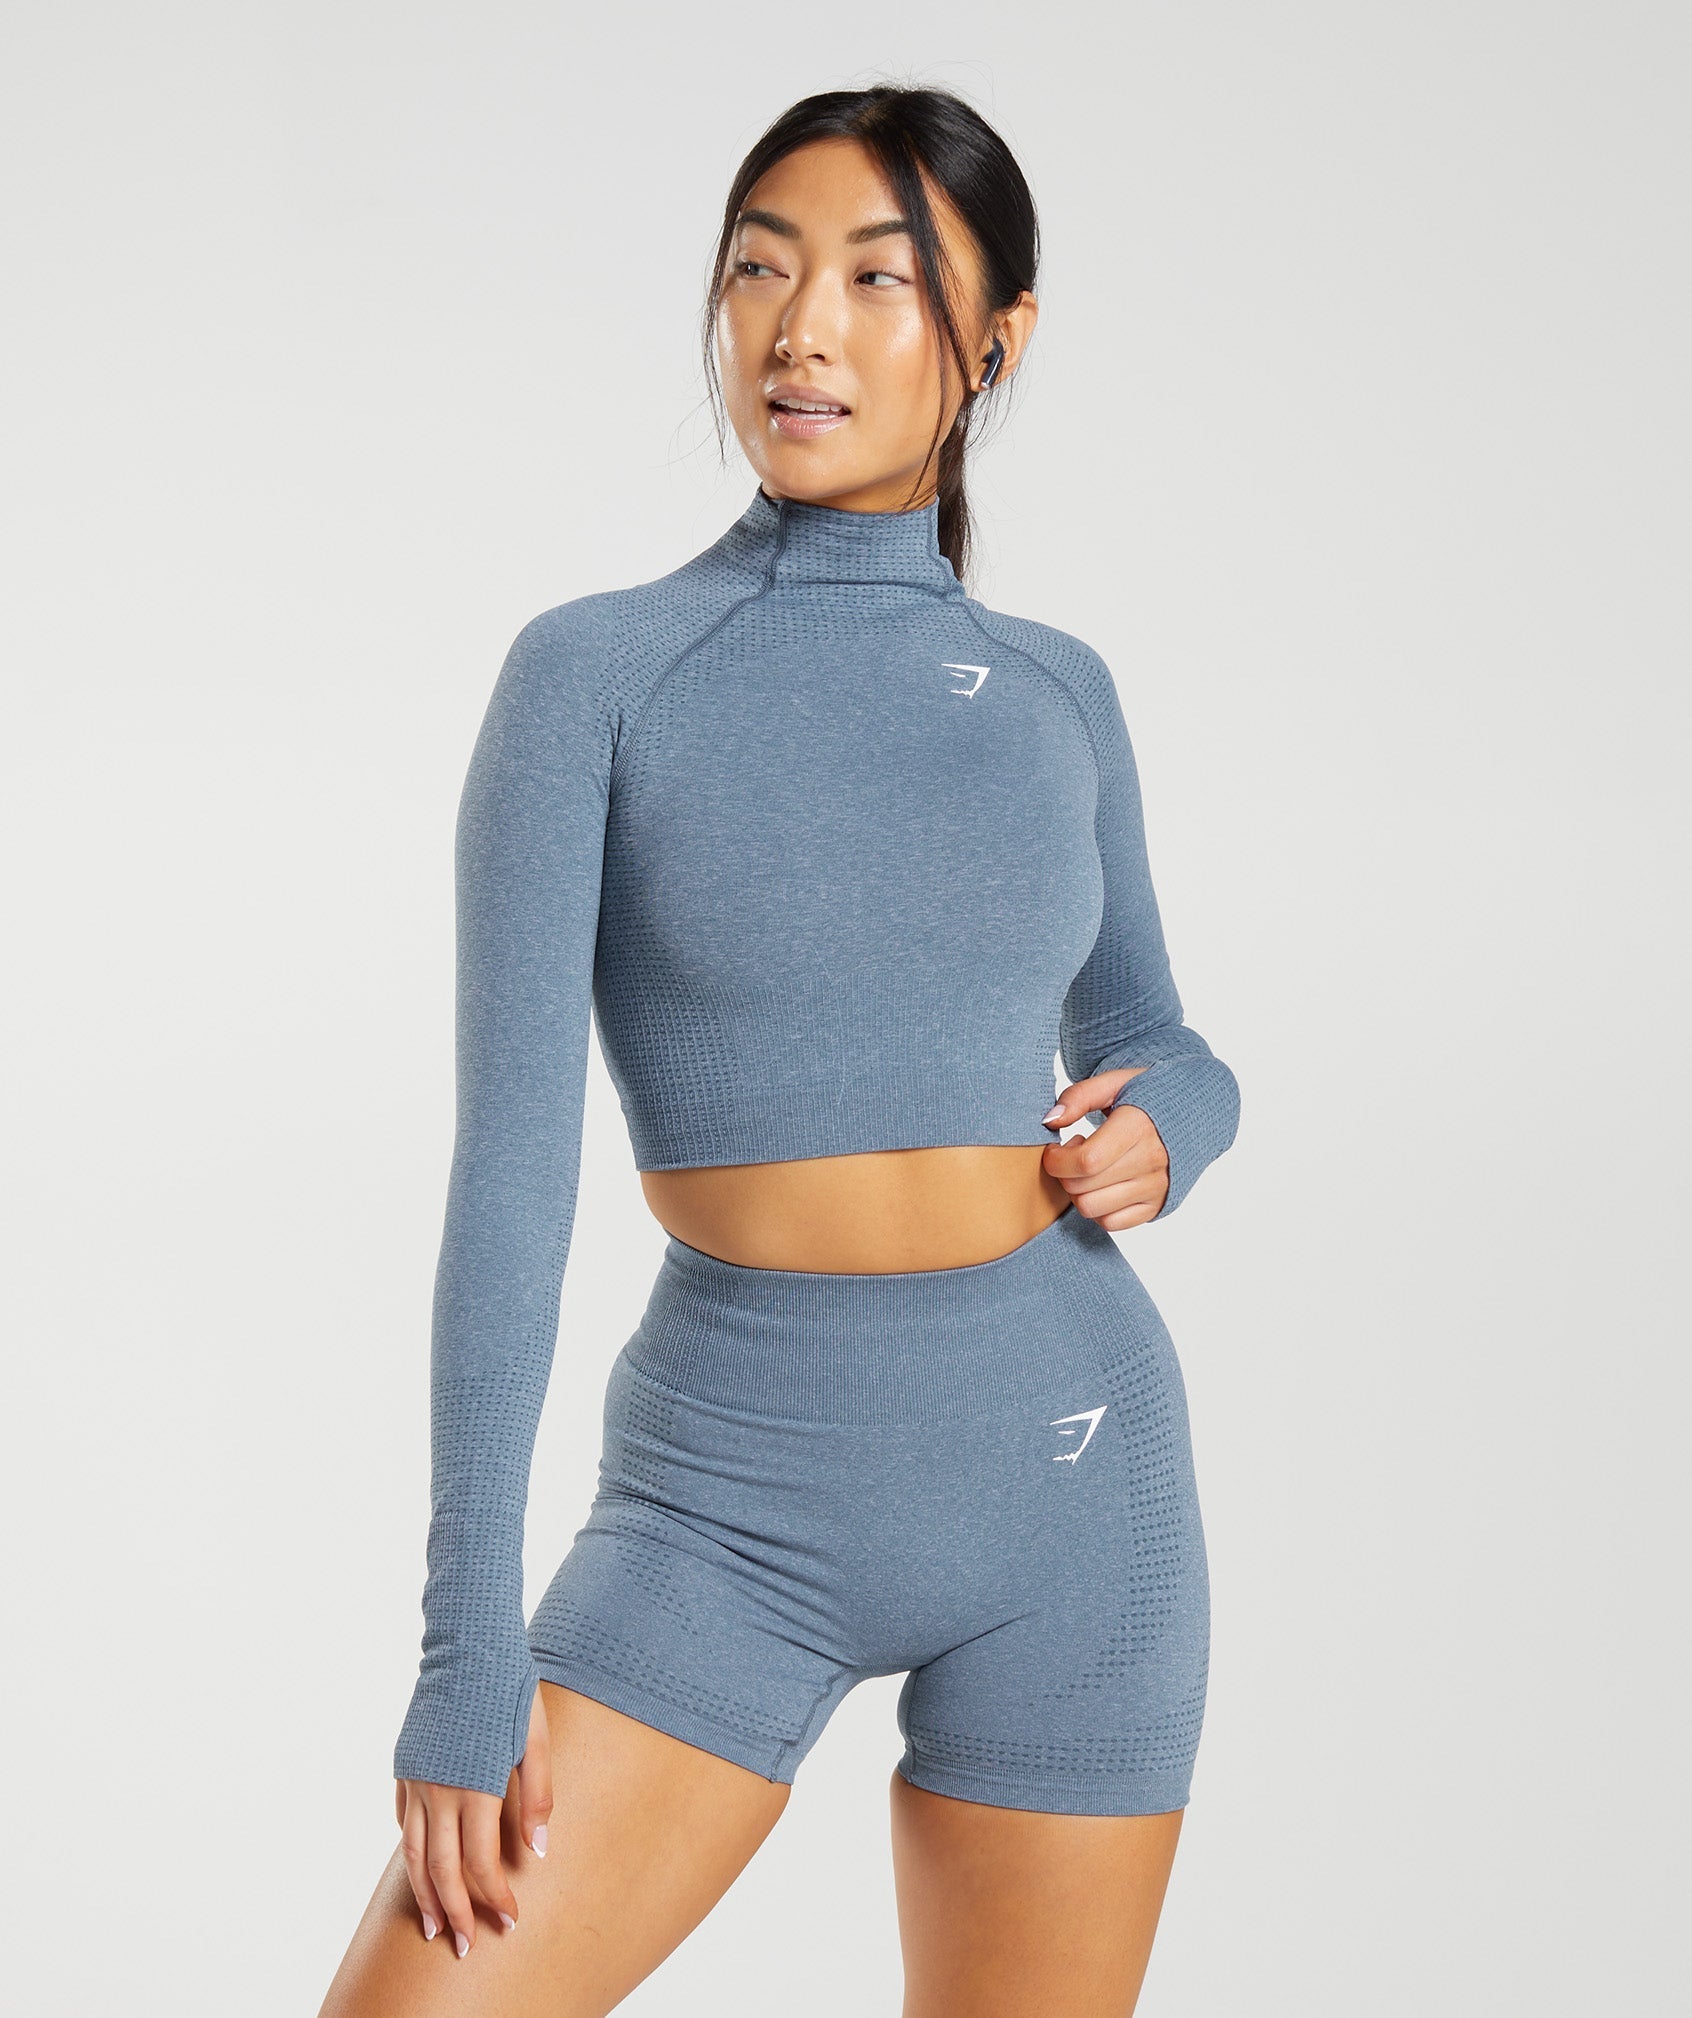 Vital Seamless 2.0 High Neck Midi Top in Evening Blue - view 1